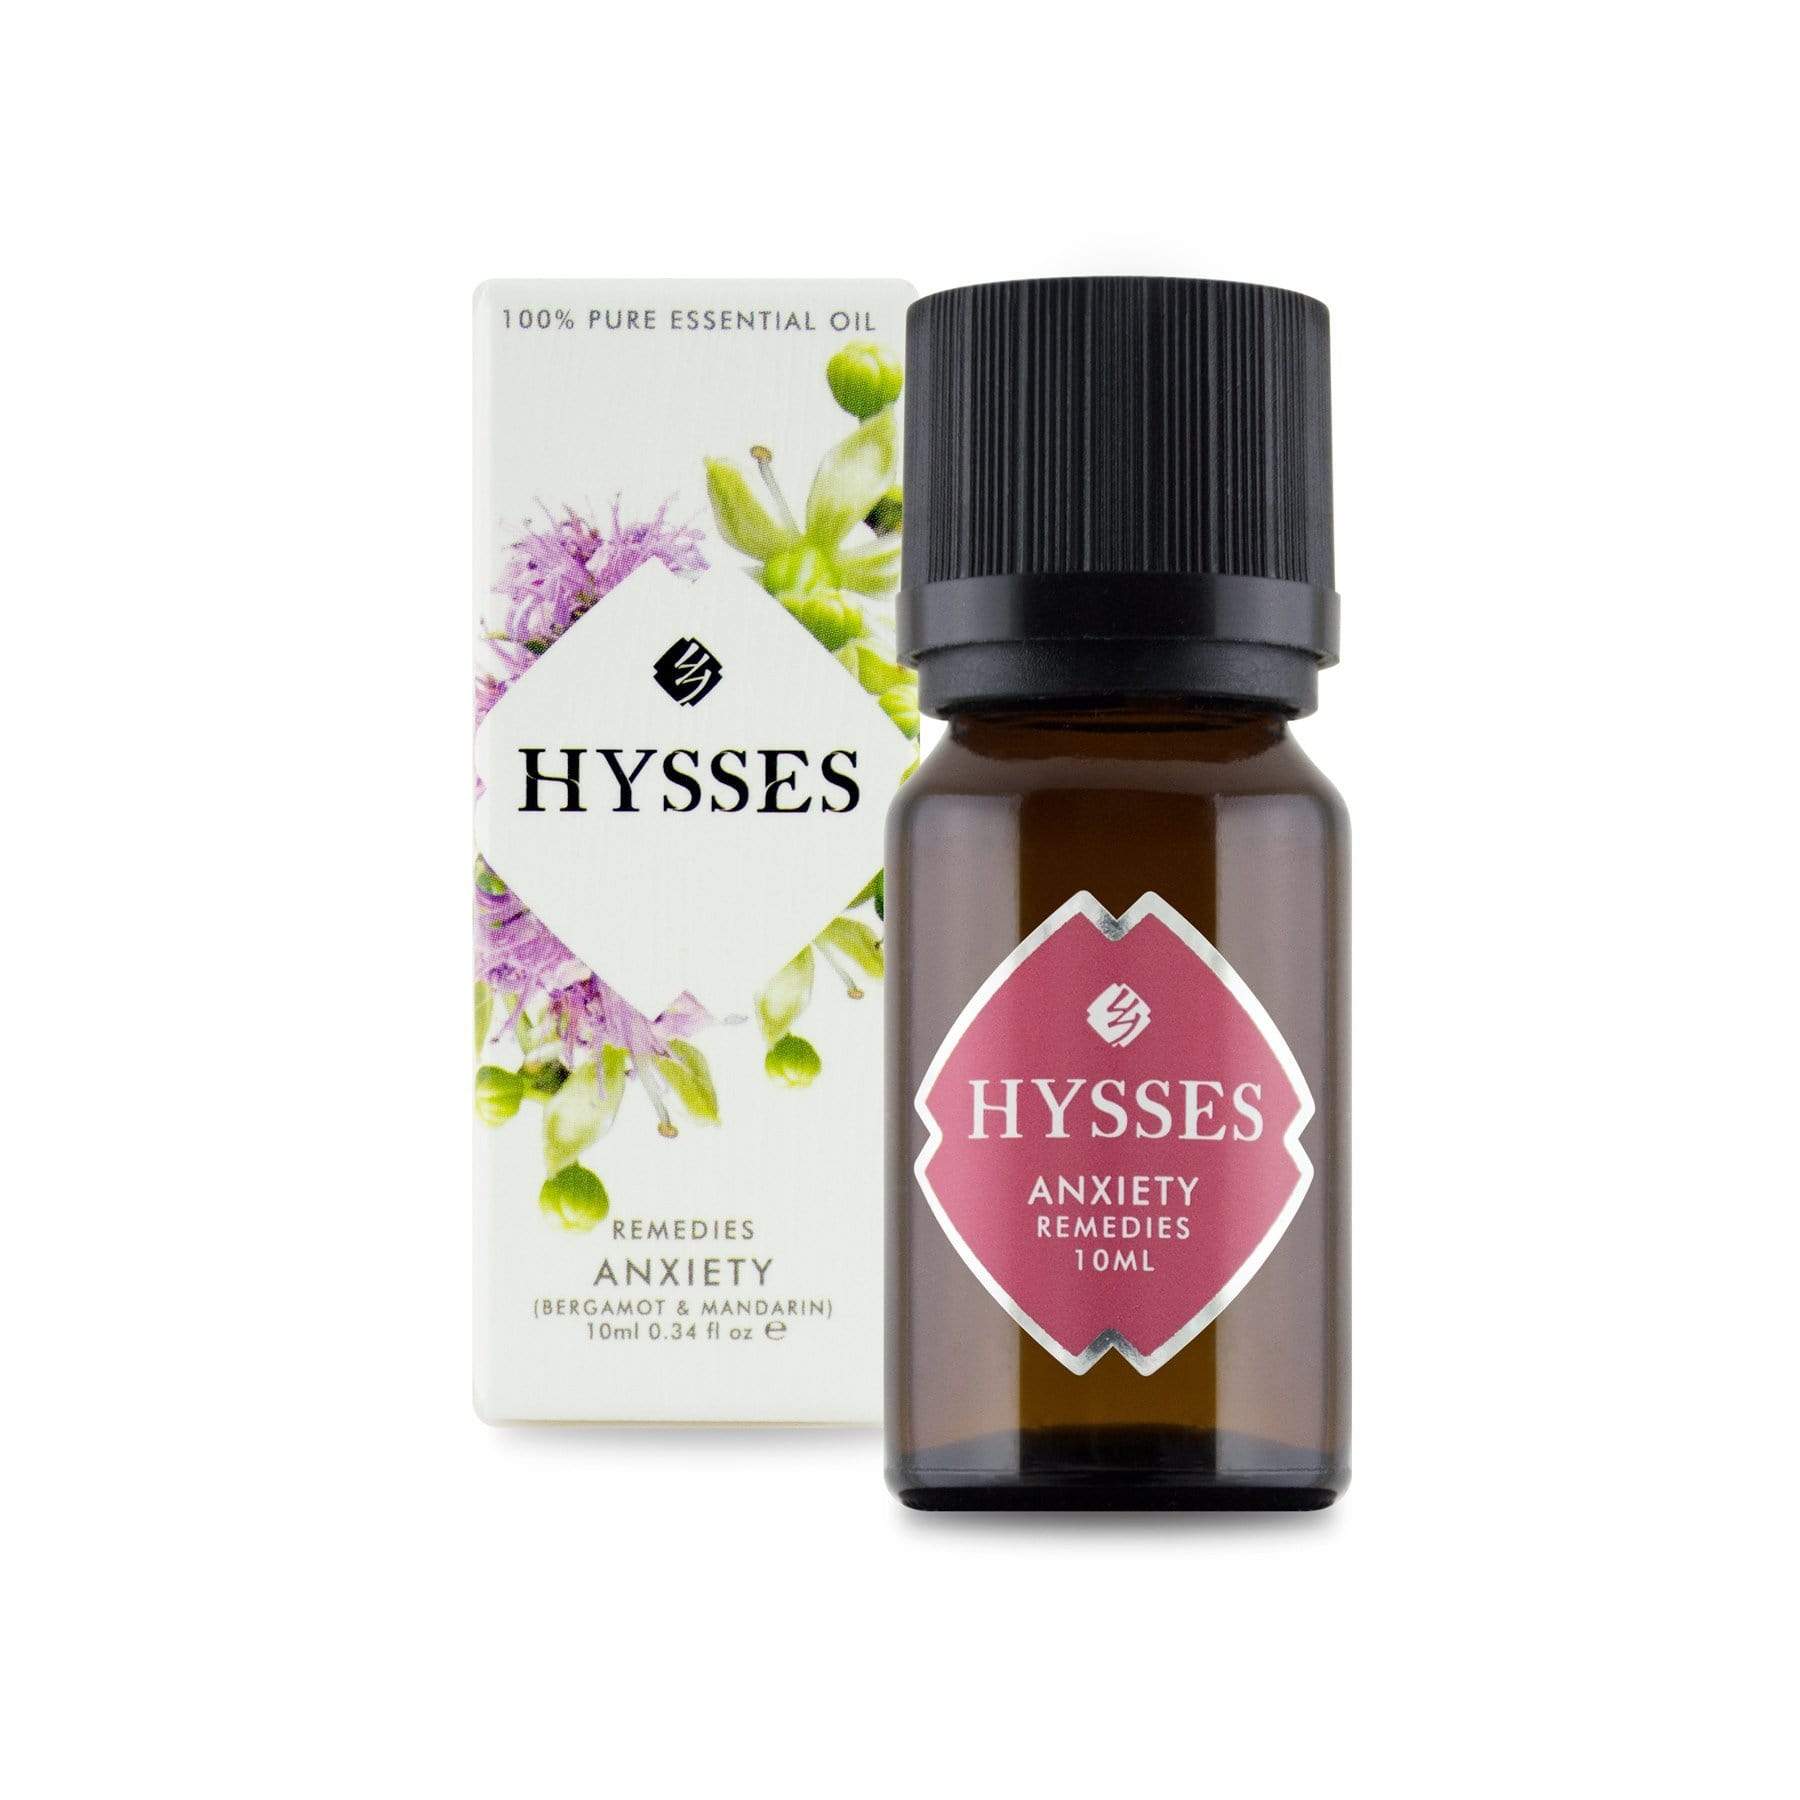 Hysses Essential Oil 10ml Remedies, Anxiety